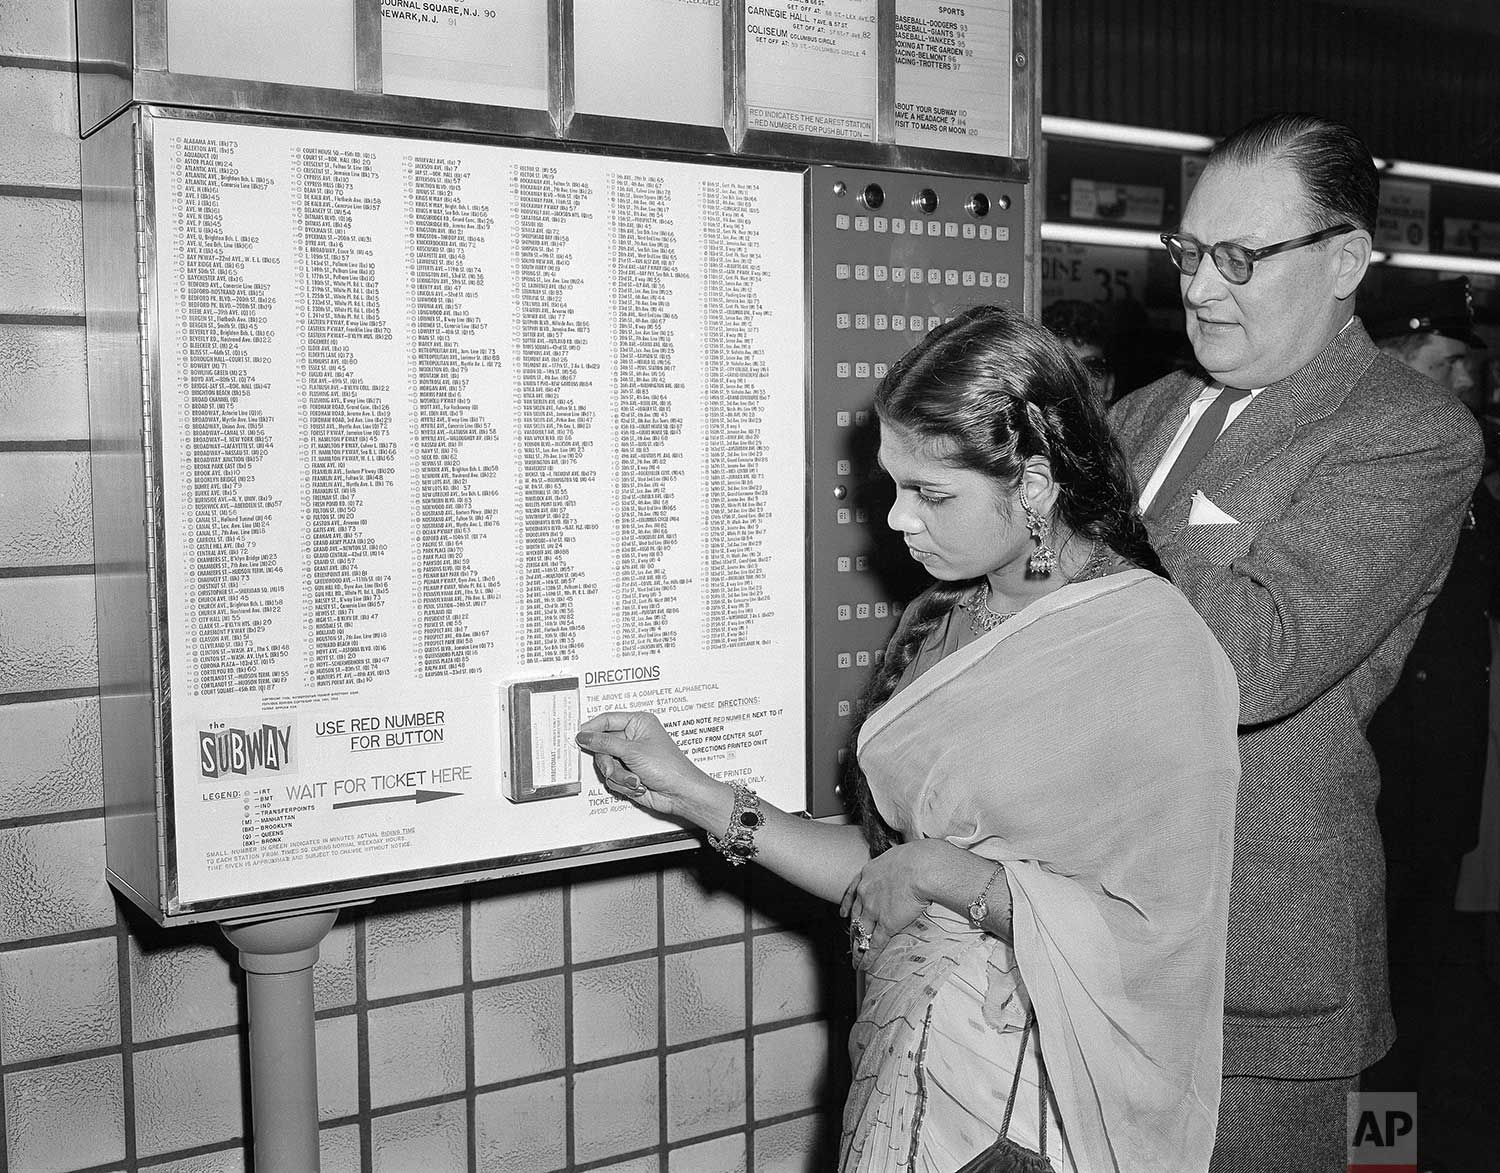  Razina Atiqullah, 23, of East Pakistan, tries out the directomat, a new device installed at the Times Square subway station in New York, April 30, 1956. (AP Photo) 